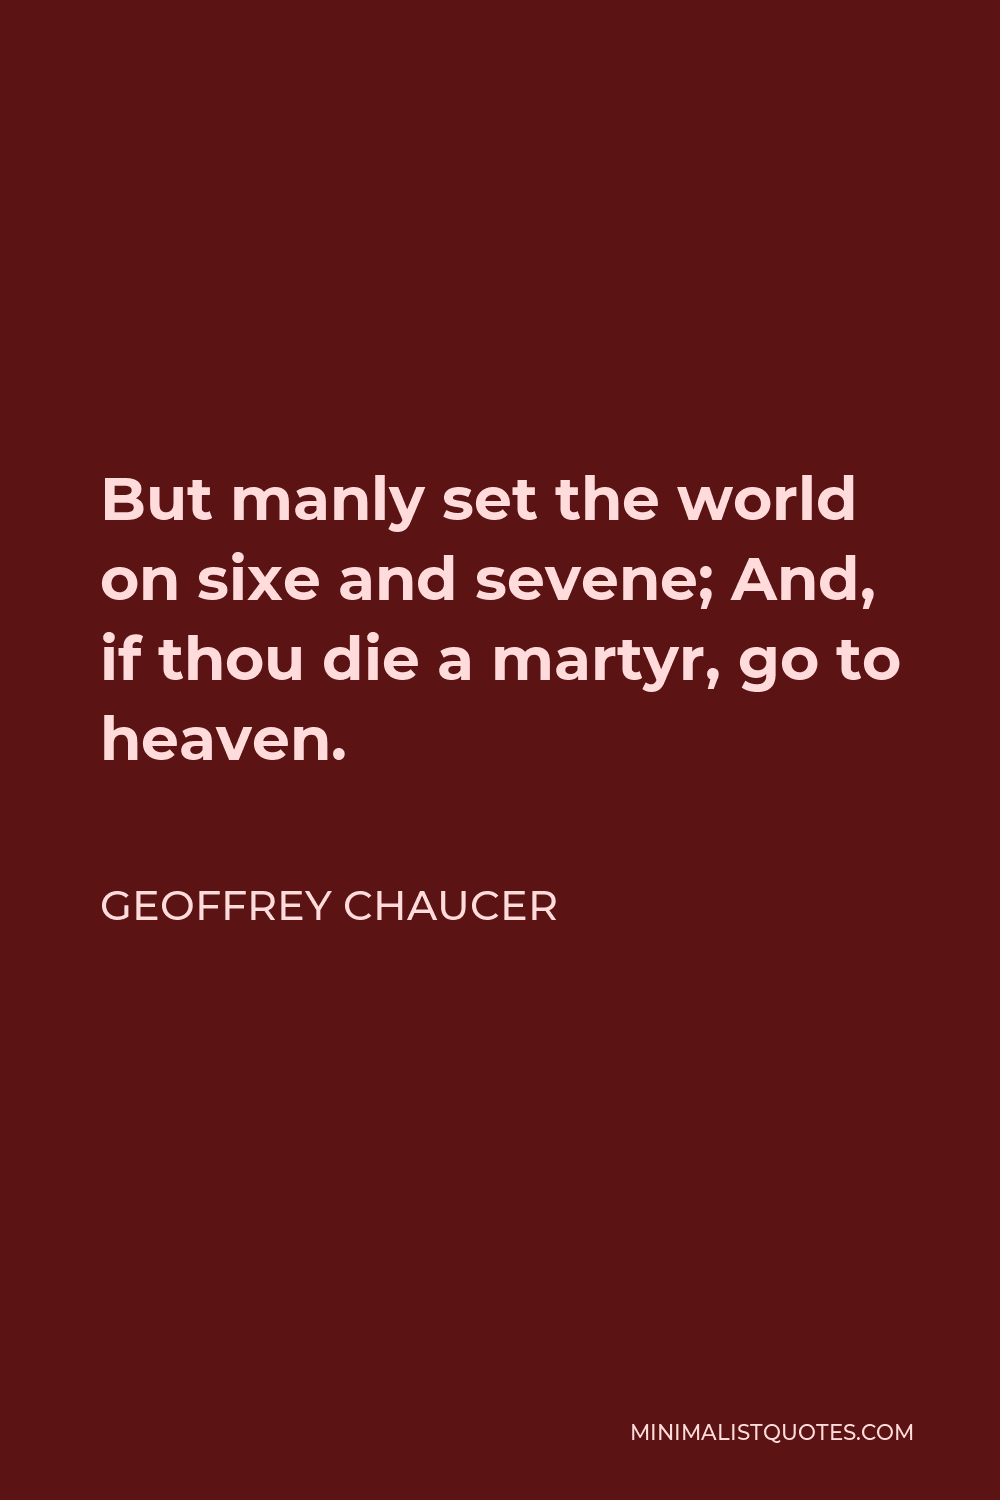 Geoffrey Chaucer Quote - But manly set the world on sixe and sevene; And, if thou die a martyr, go to heaven.